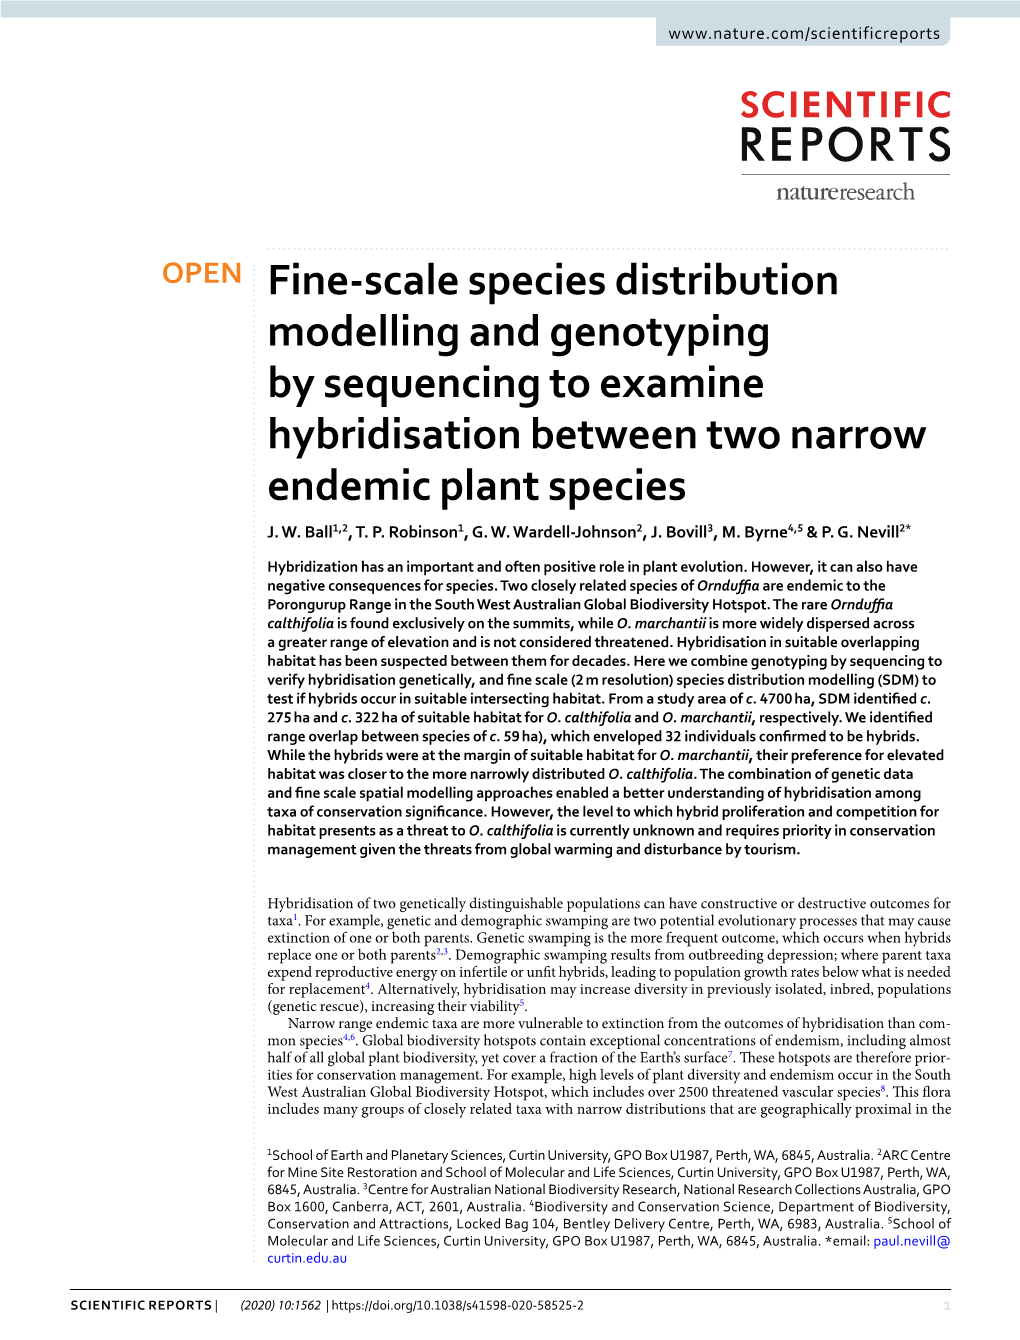 Fine-Scale Species Distribution Modelling and Genotyping by Sequencing to Examine Hybridisation Between Two Narrow Endemic Plant Species J